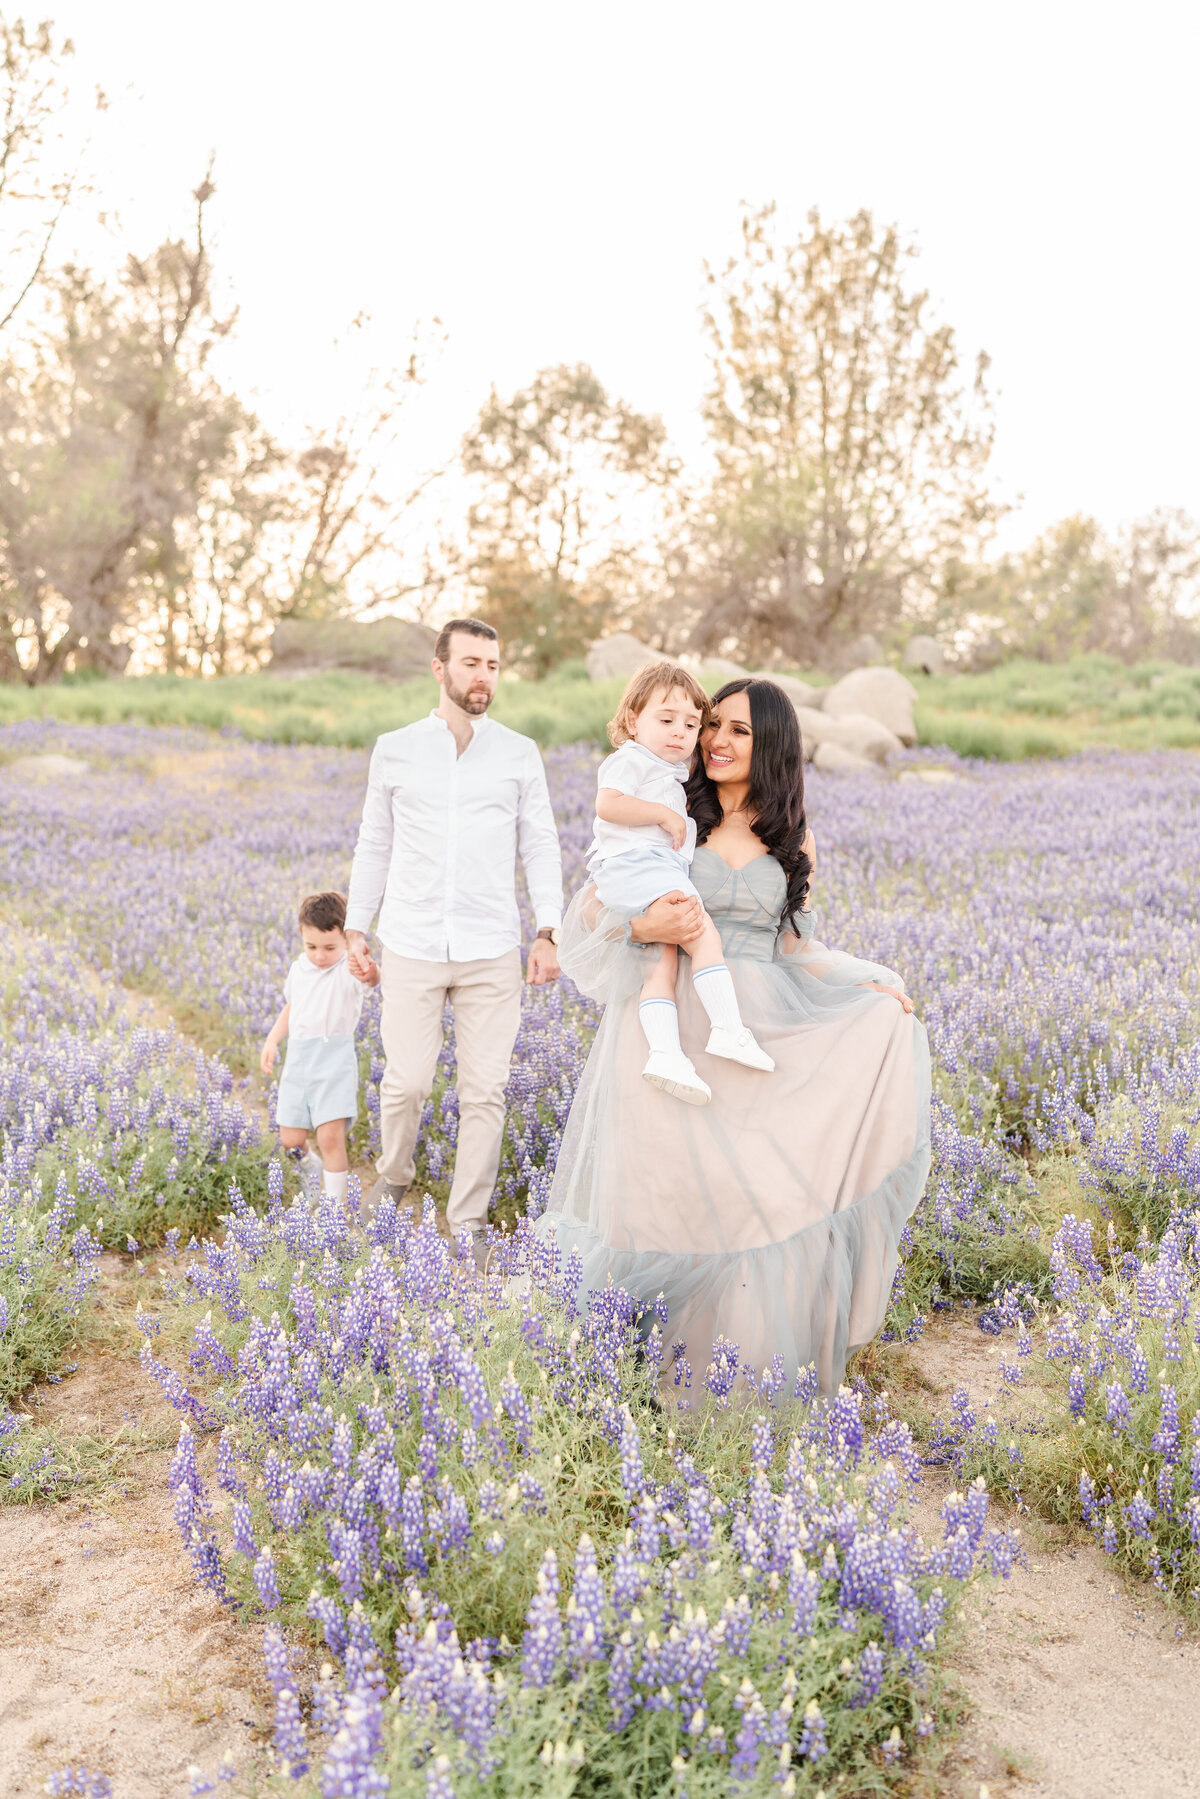 A family of four is walking in a field of purple lupines while the mother is holding the youngest child and twirling her dress photographed by bay area photography, Light Livin Photography.